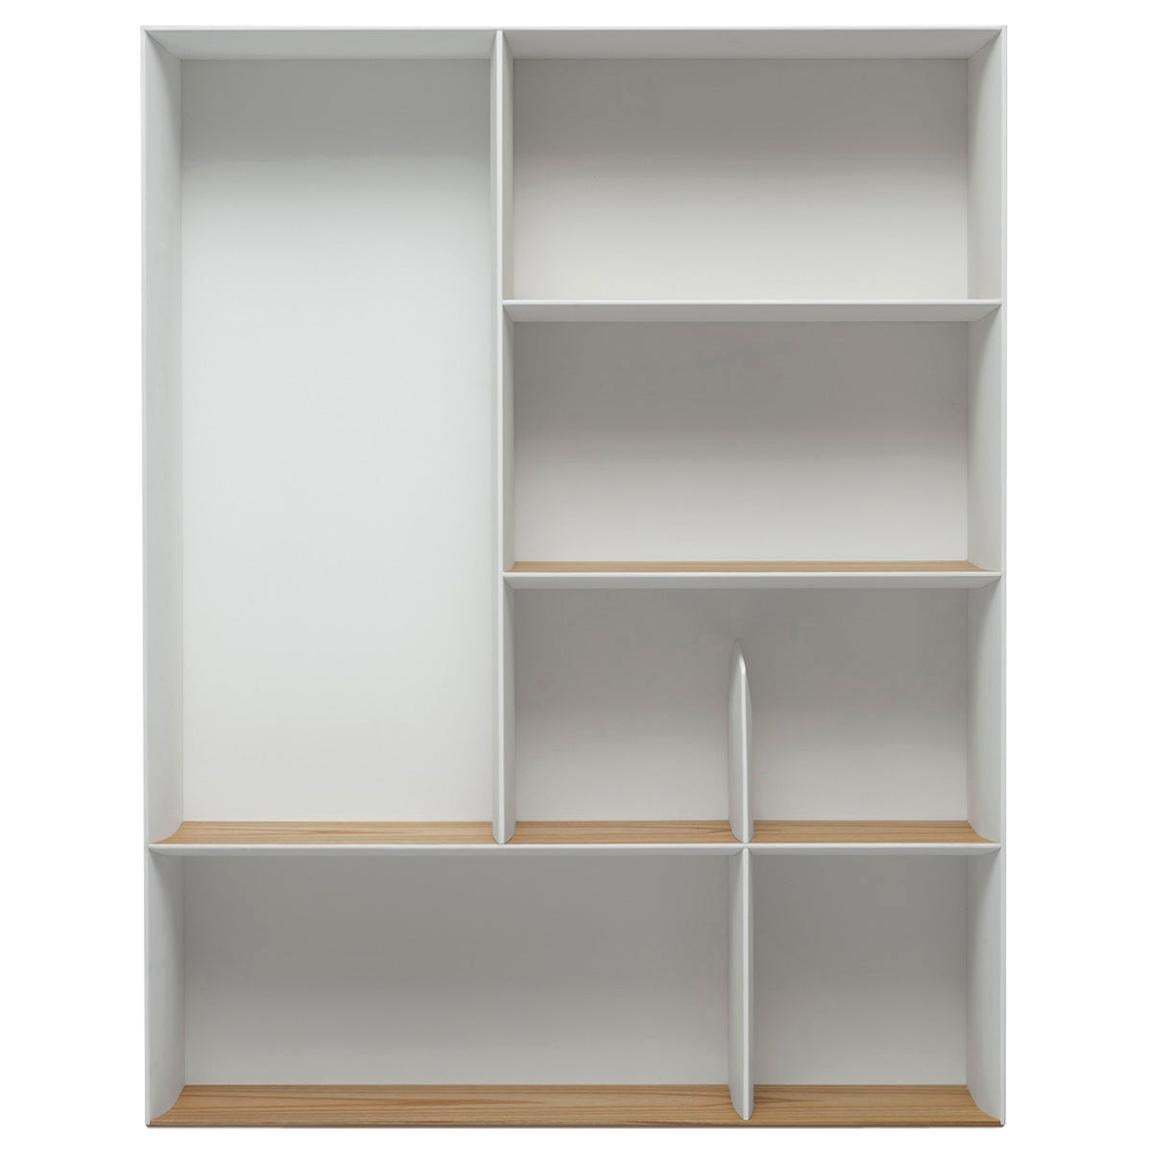 White Suspended Bookcase Molteni&C by Gio Ponti - D.357.2 - made in Italy